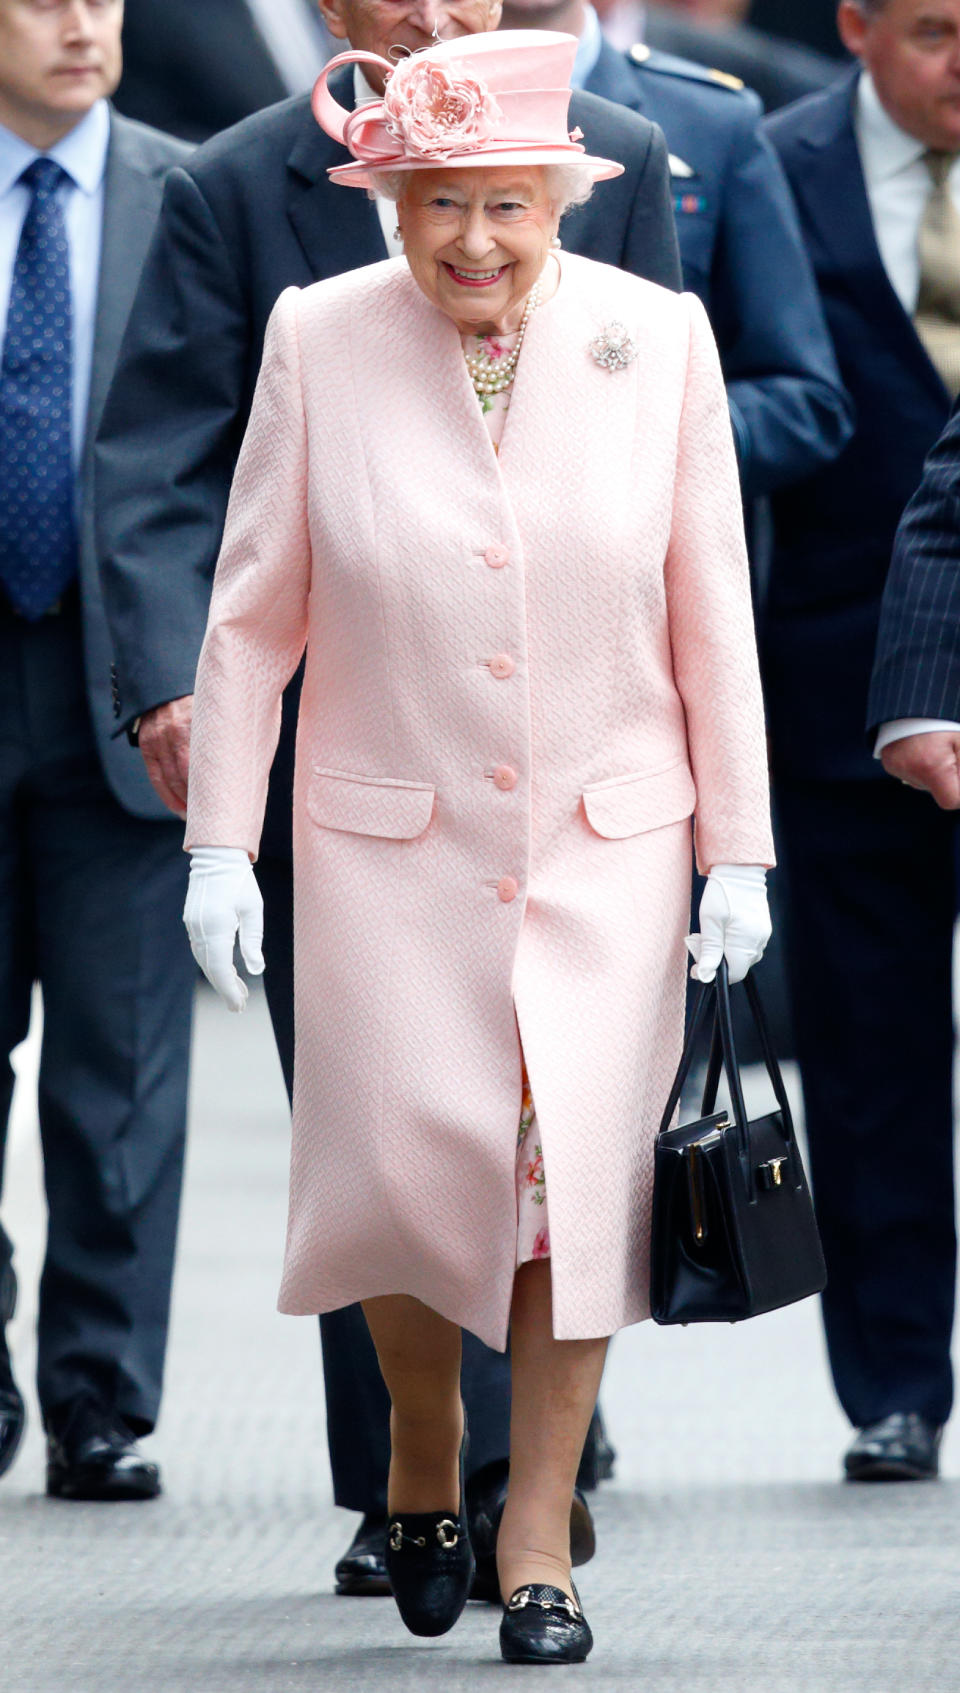 The documentary, Queen of the World, is set to focus on the 92-year-old Monarch’s dedication to the 53 countries in the Commonwealth over her 66 years on the throne. Photo: Getty Images